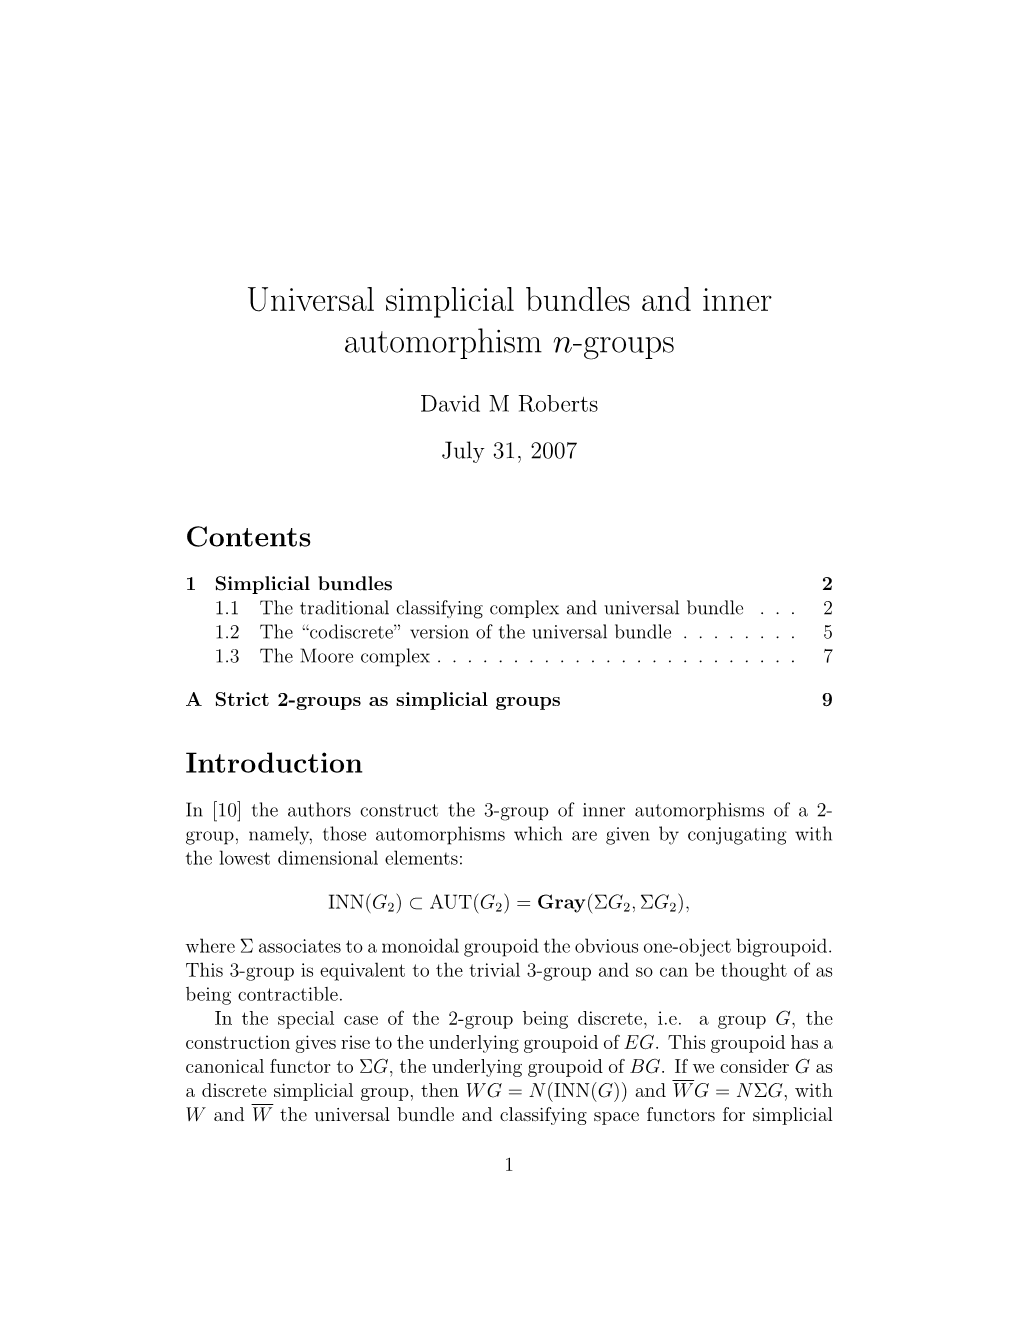 Universal Simplicial Bundles and Inner Automorphism N-Groups